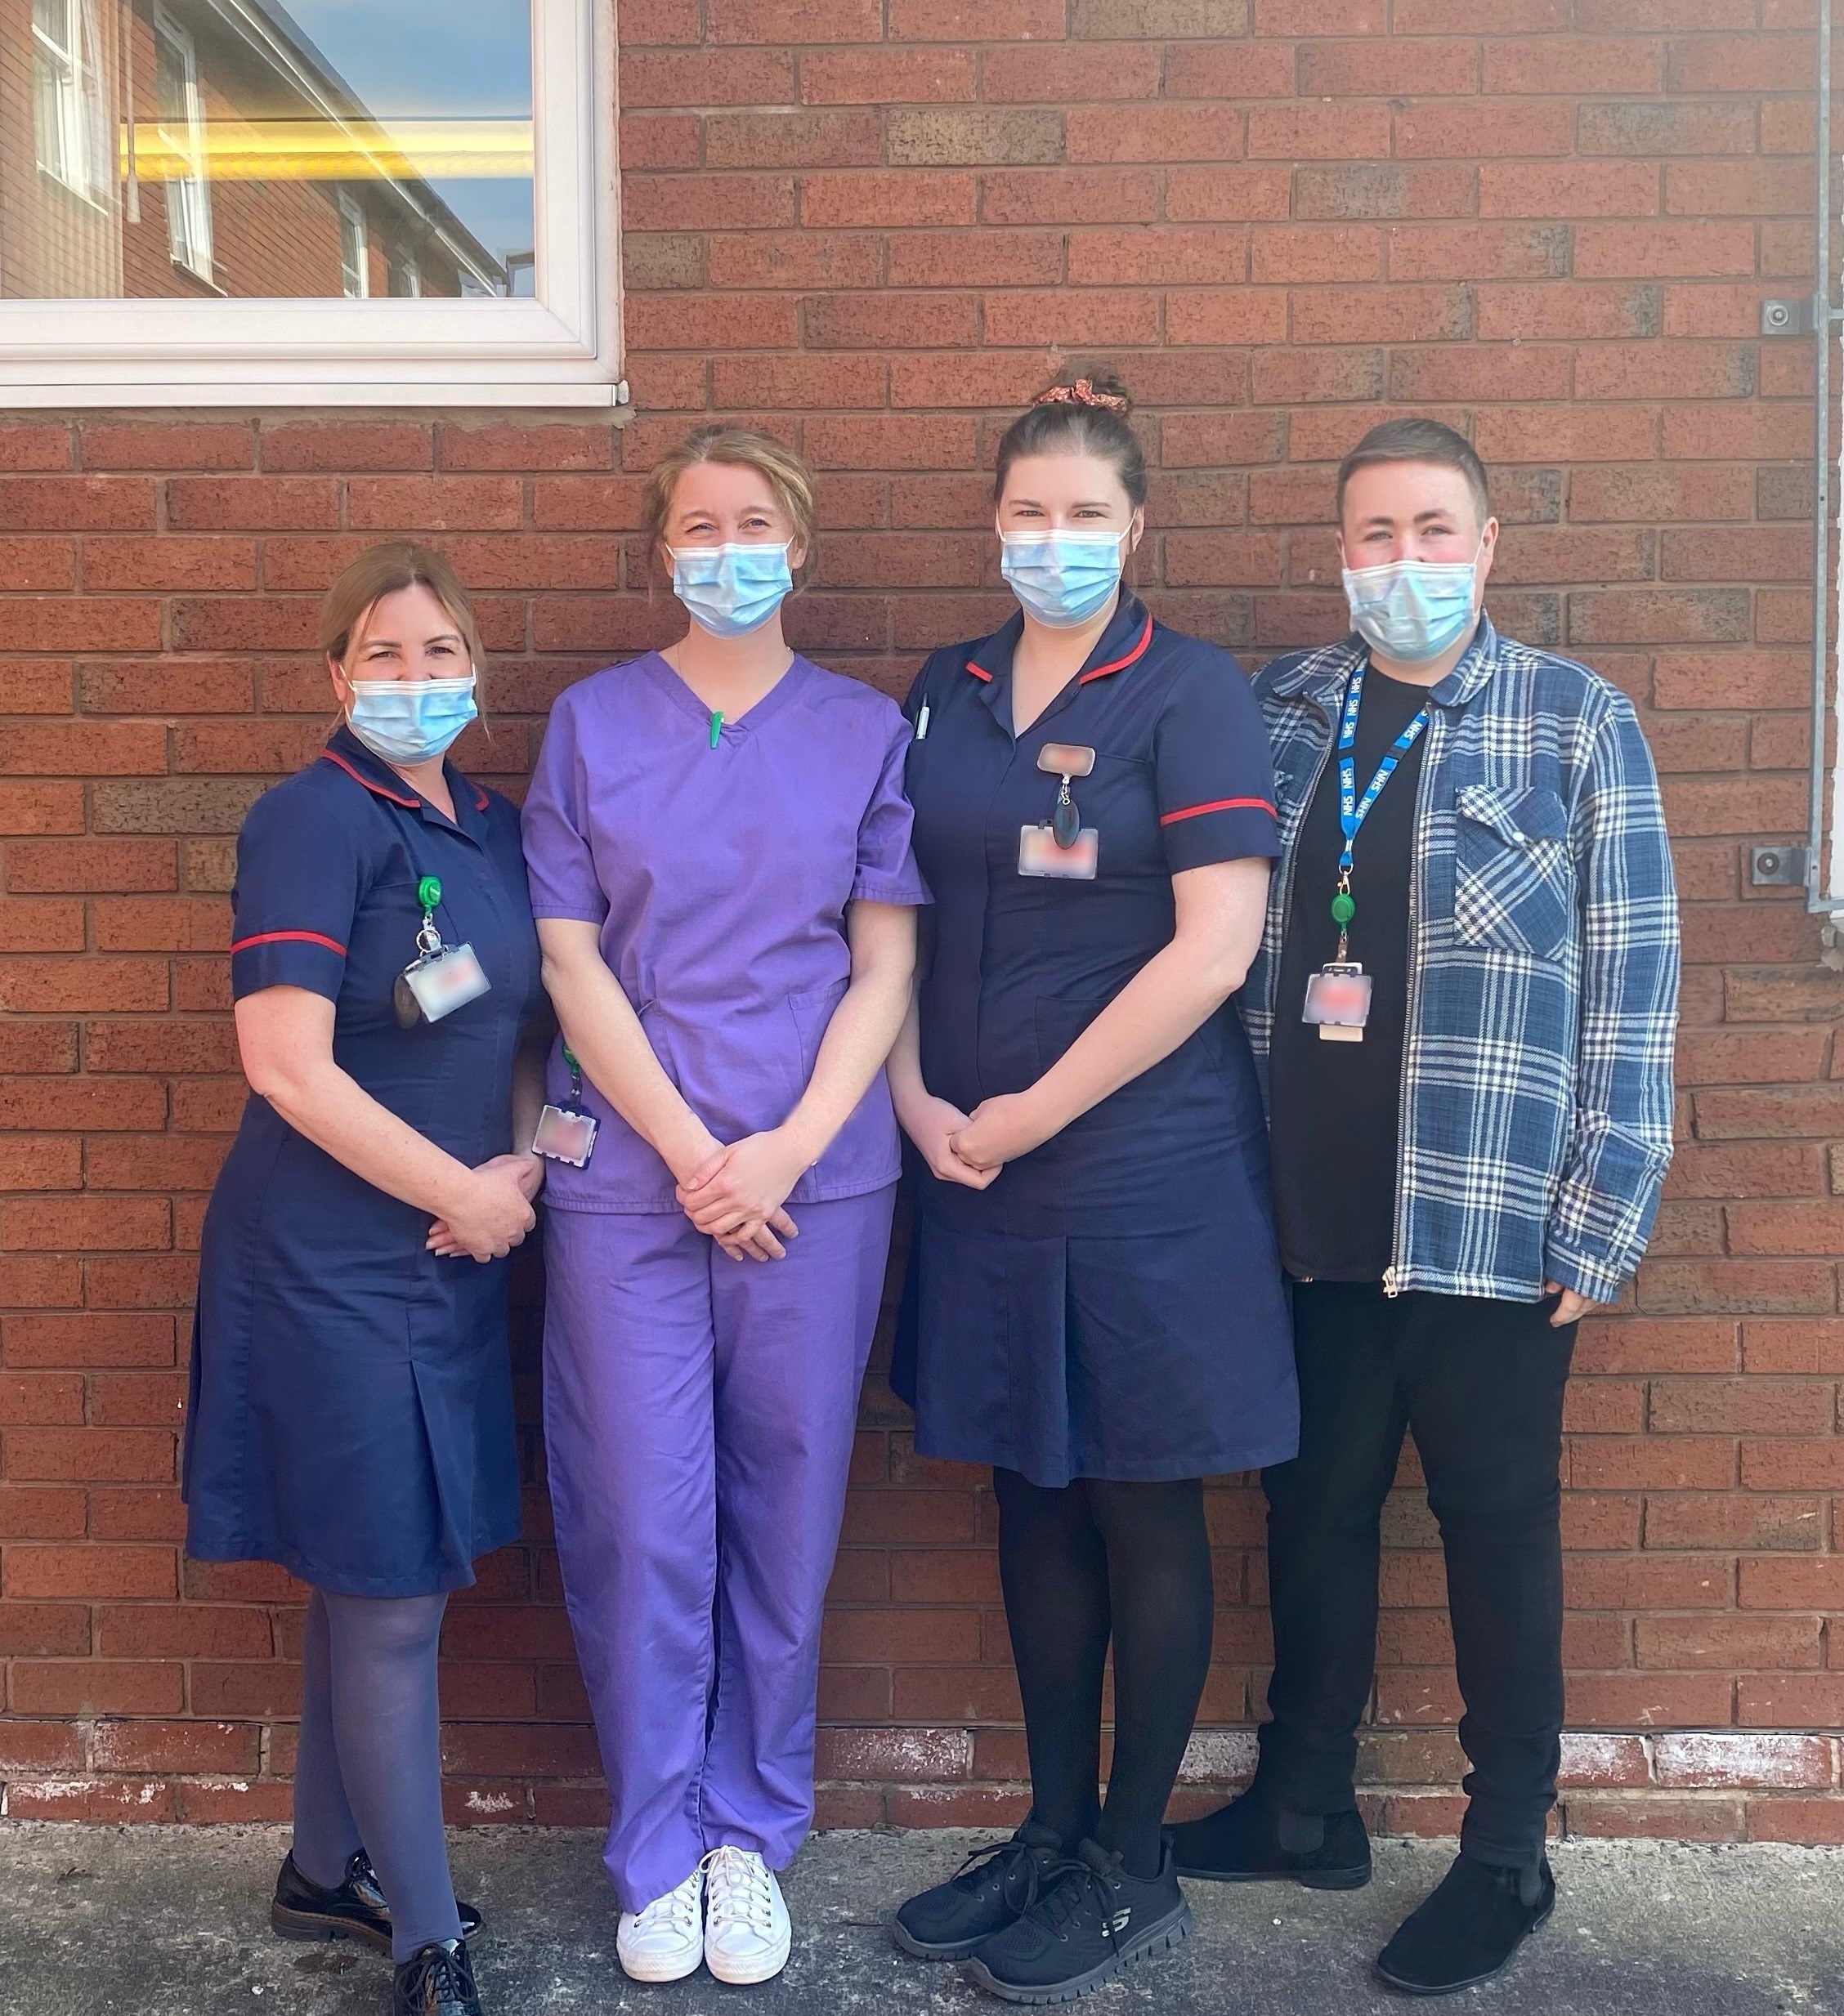 – From left to right, Nicky Norris Specialist Palliative Care Nurse, Dr Laura Edwards Palliative Care Consultant, Emma Davidson Specialist Palliative Care Nurse and Liam Henighan MDT Coordinator.